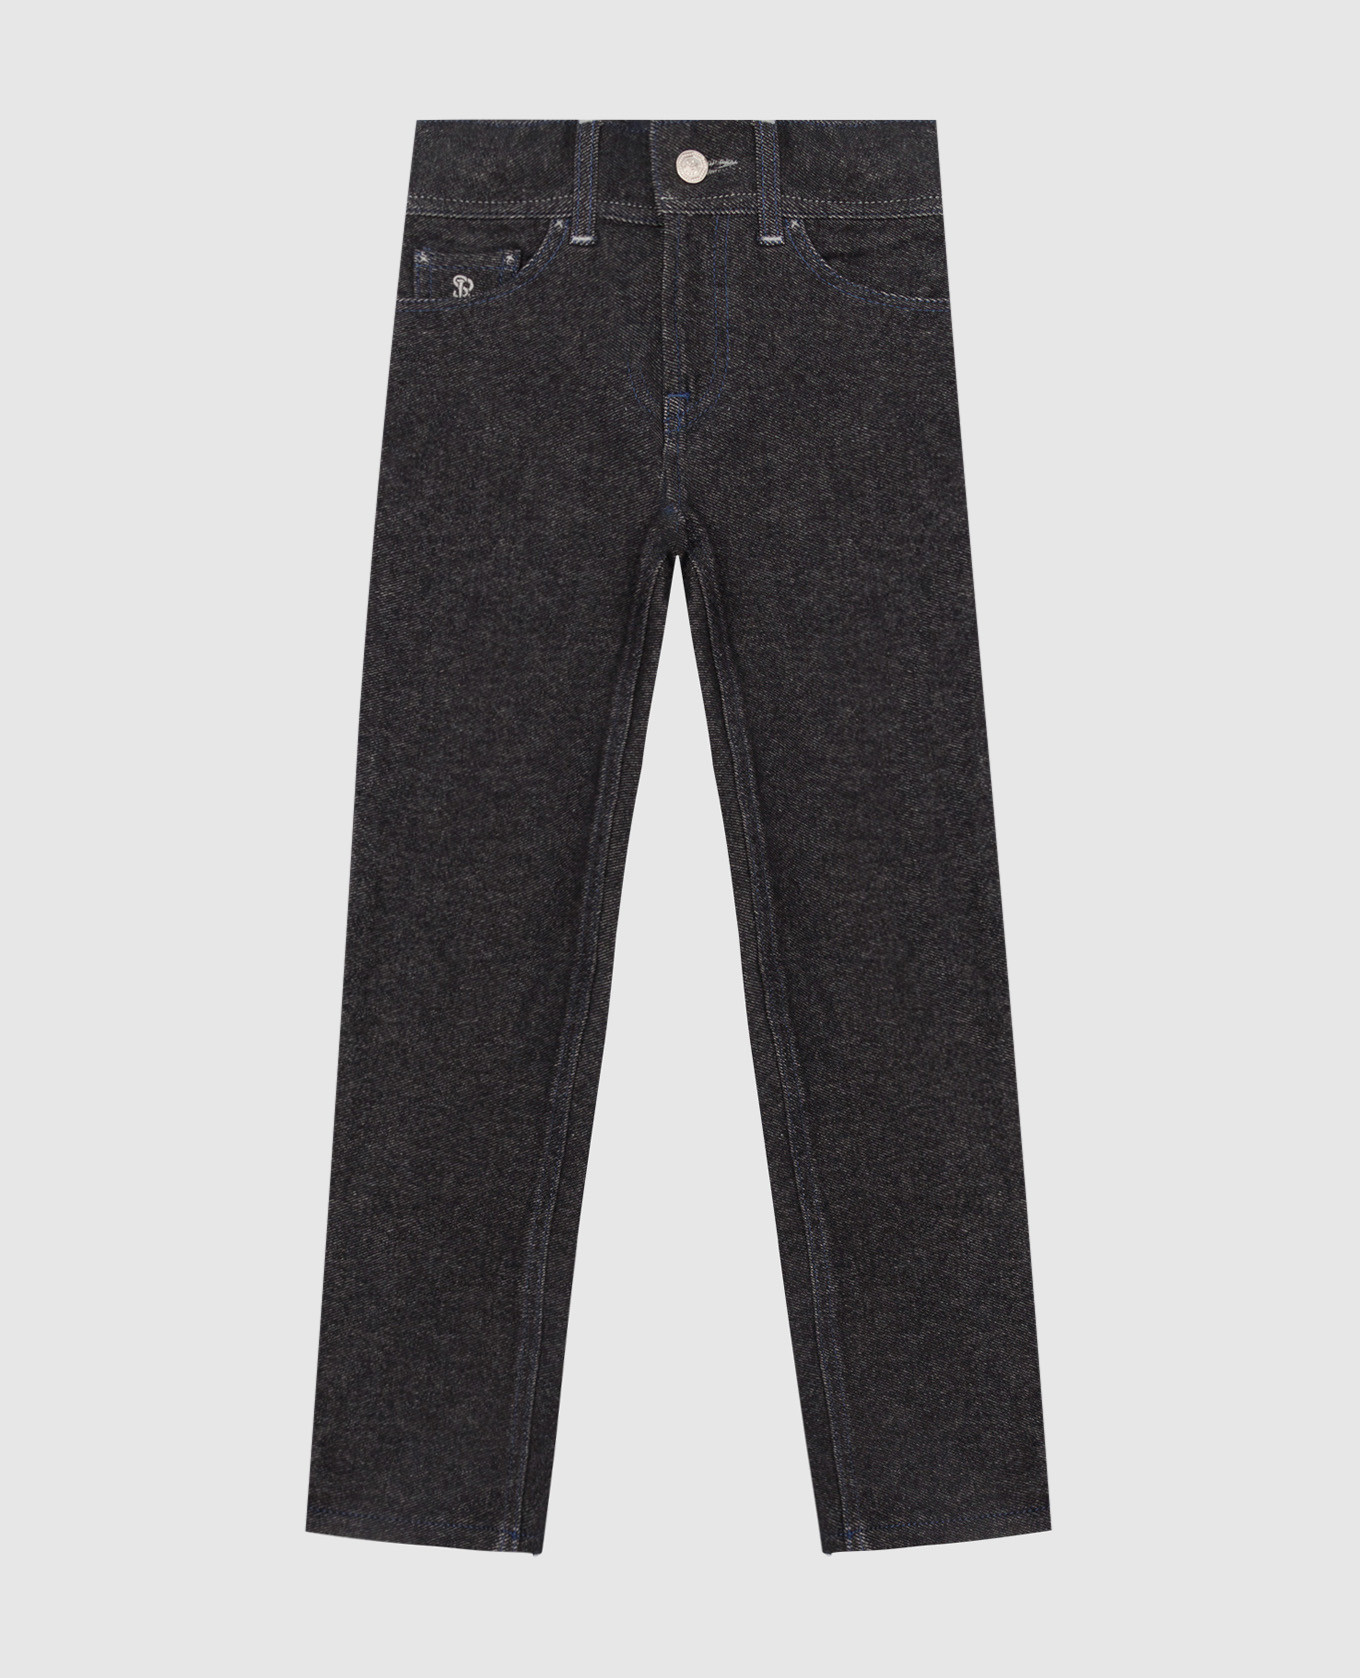 Children's dark gray trousers with embroidery